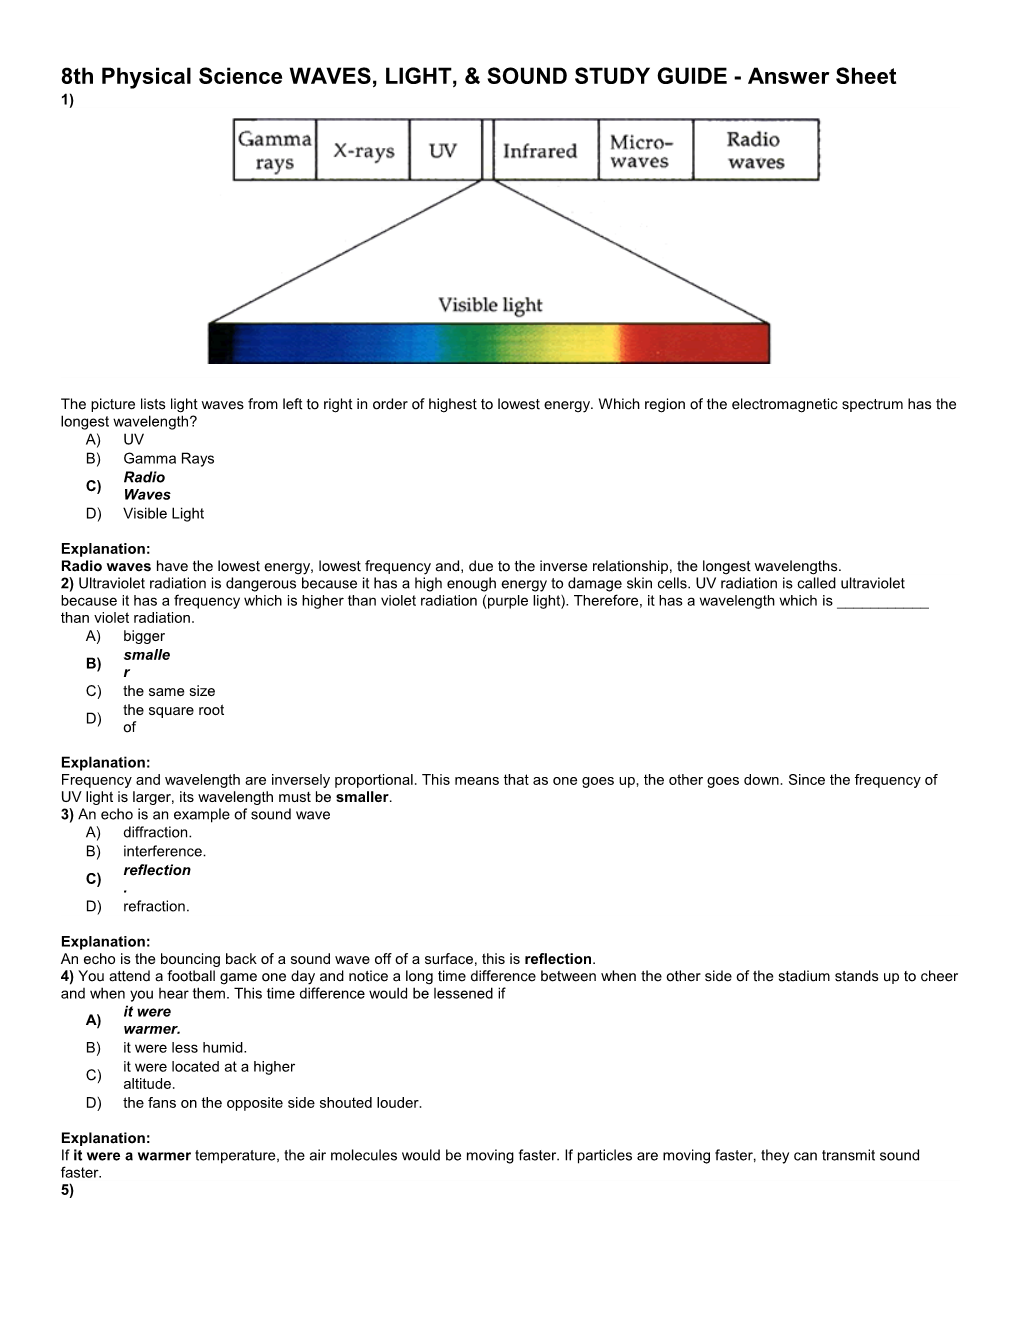 8Th Physical Science WAVES, LIGHT, & SOUND STUDY GUIDE - Answer Sheet